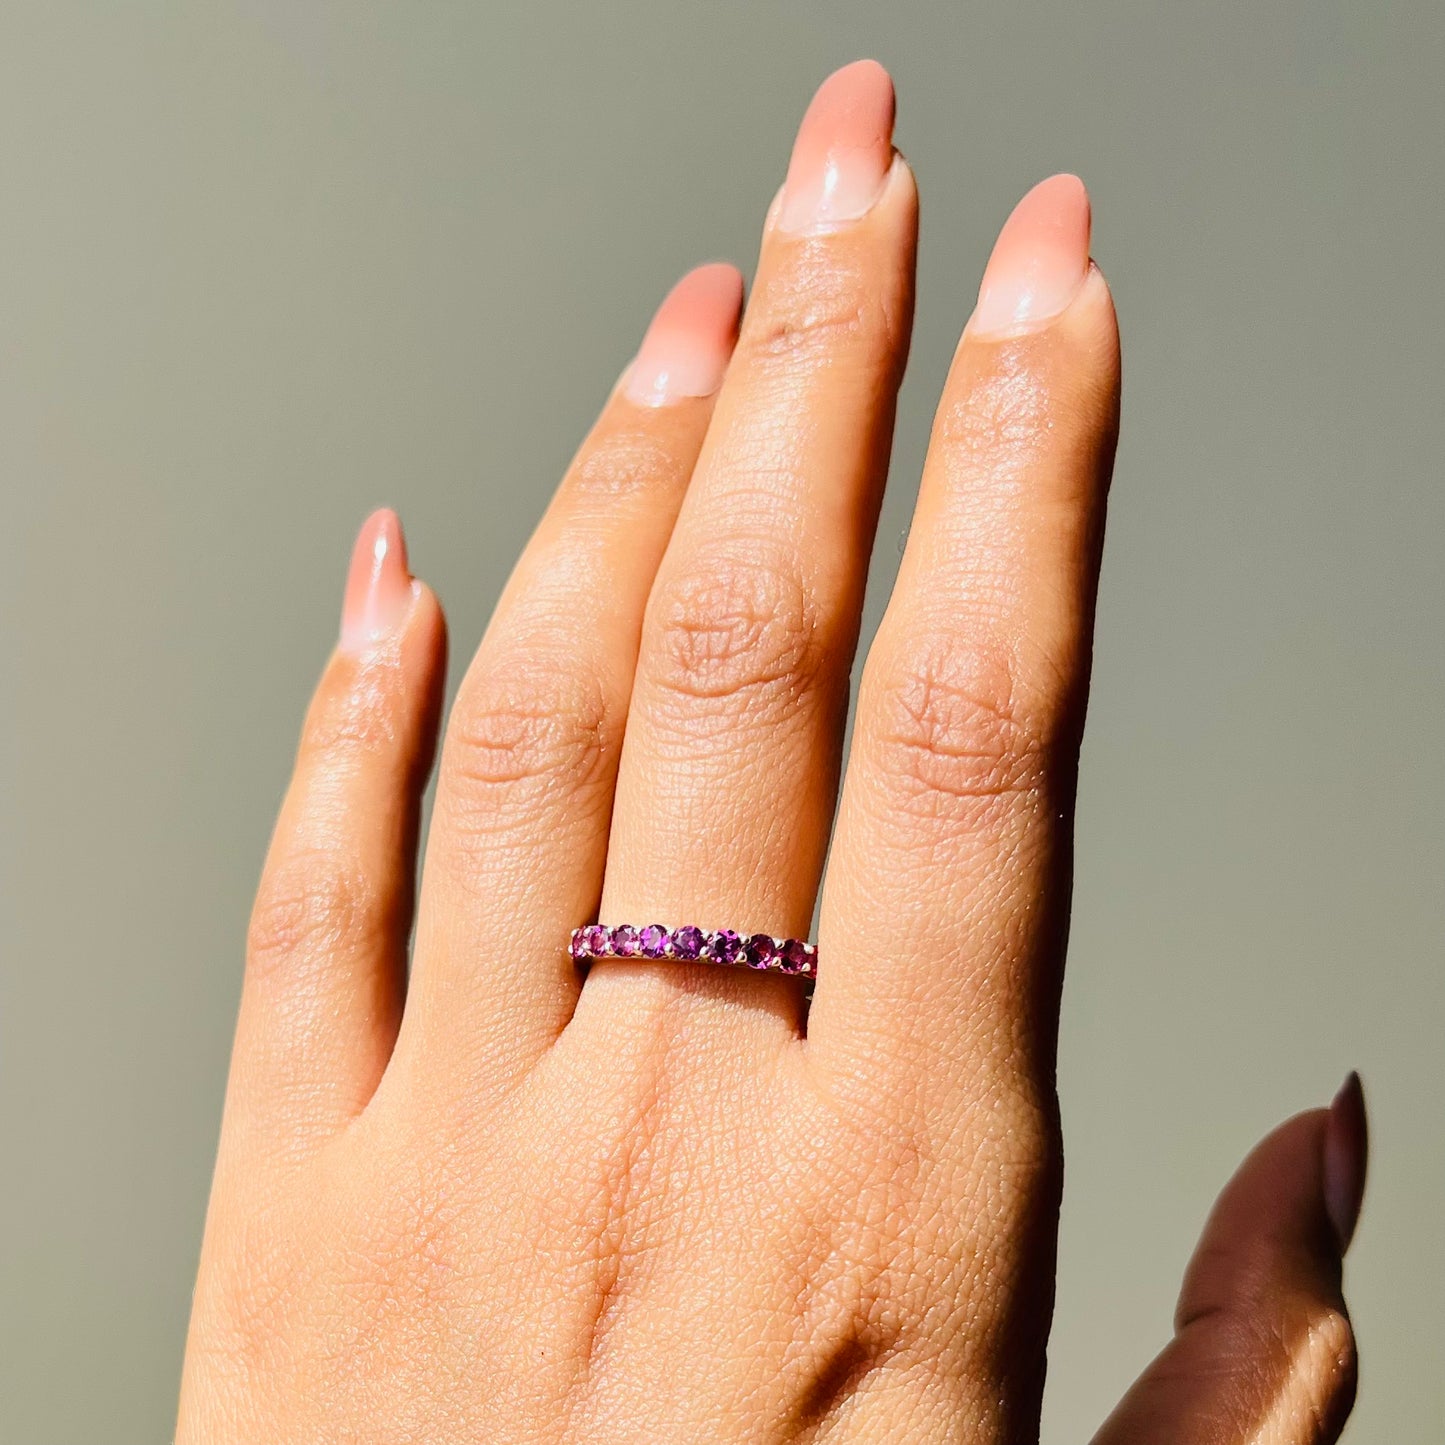 Natural Purple Garnet Silver Band Ring - From Purl Purl